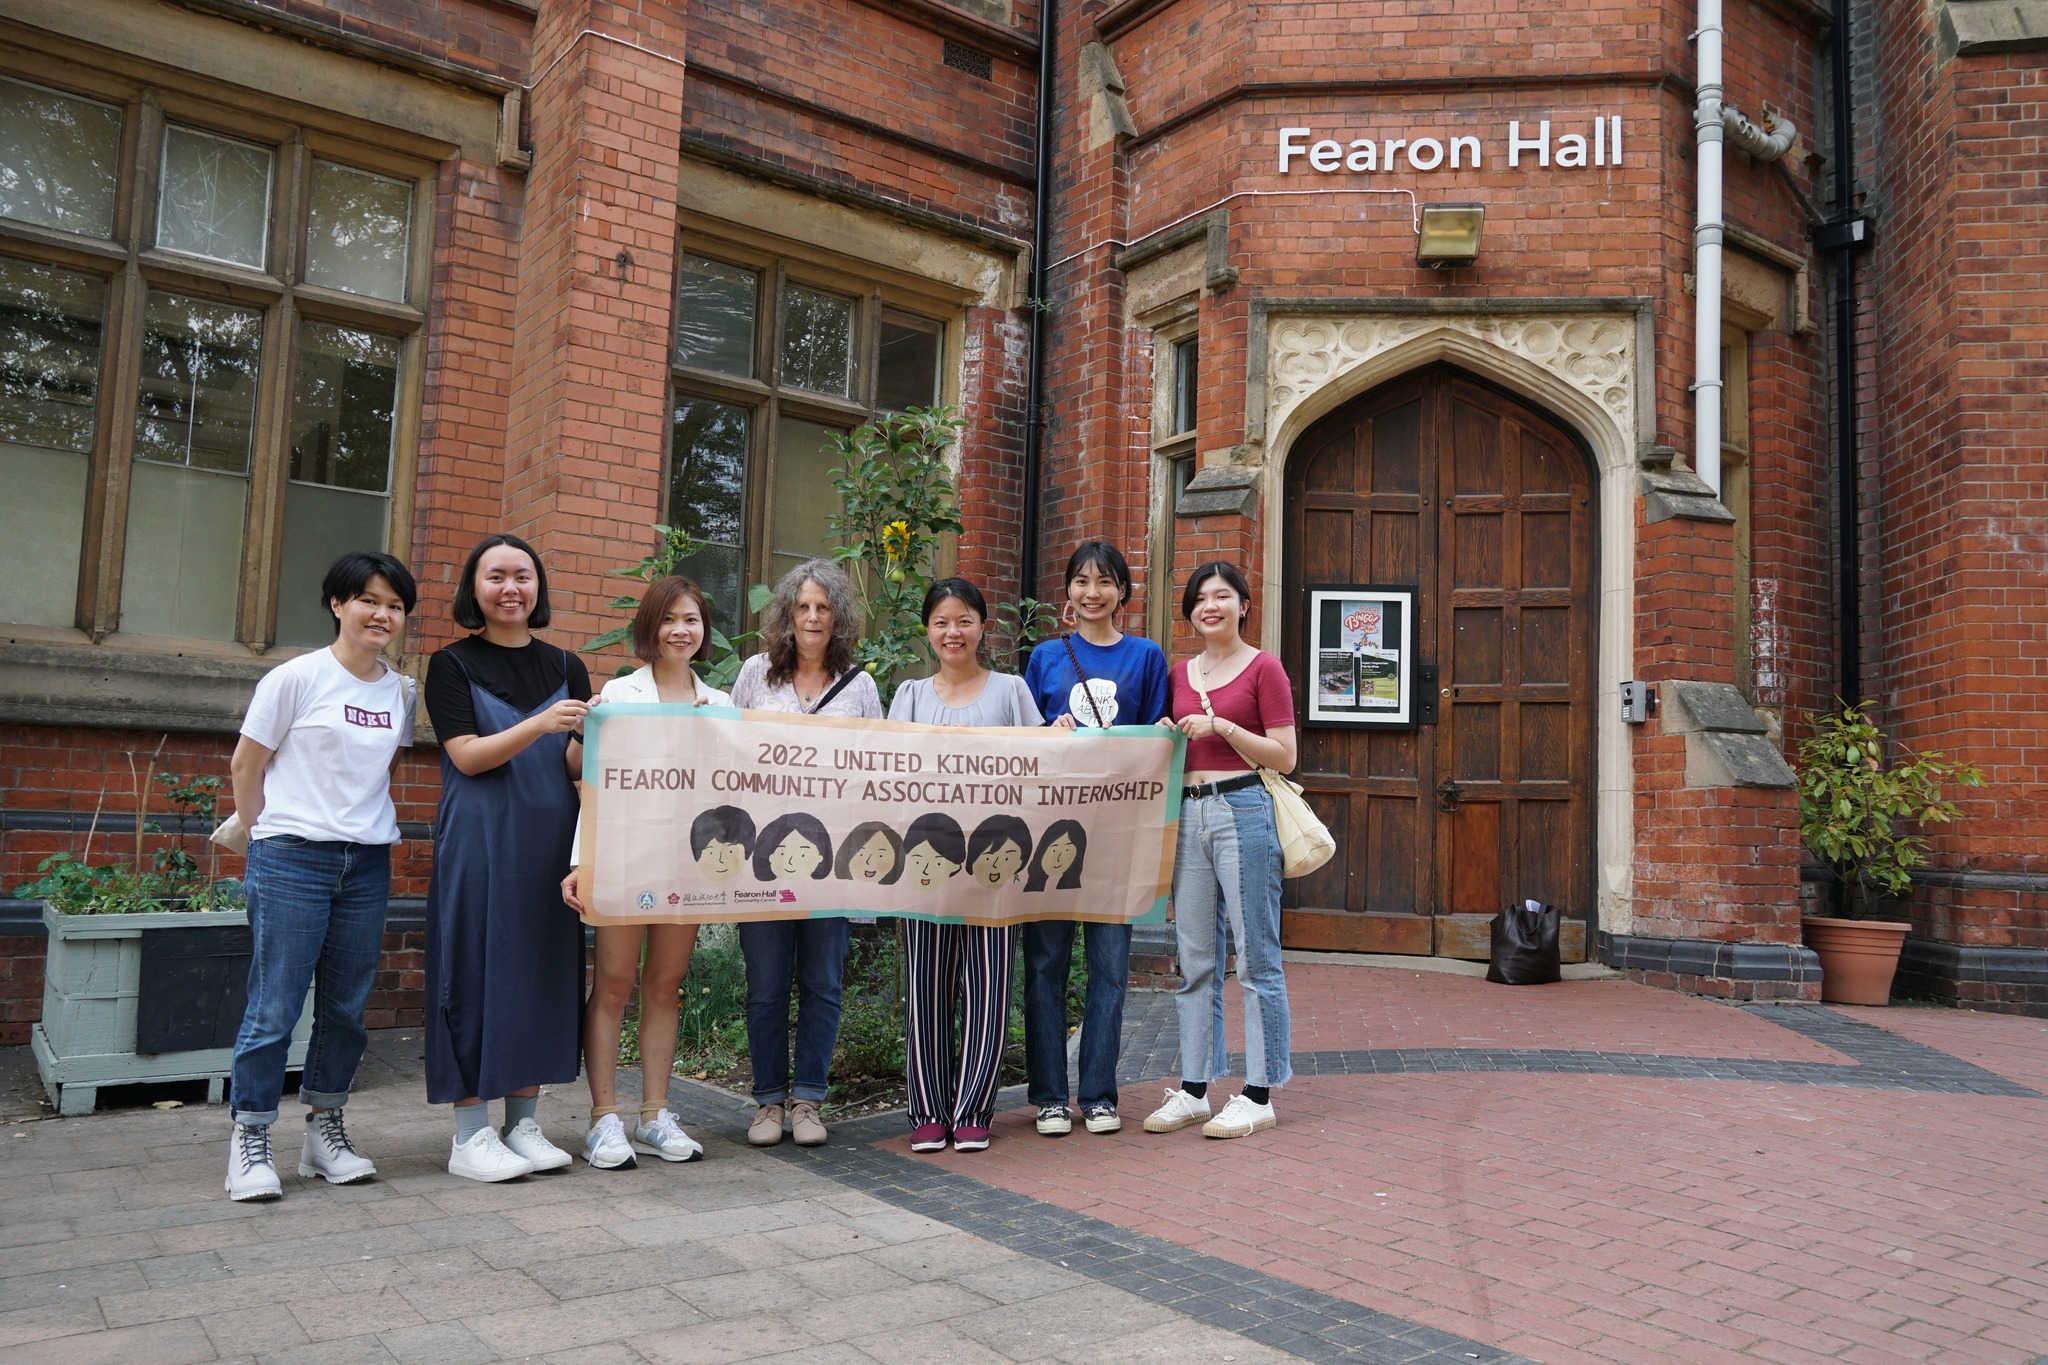 The first day at Fearon Hall – A group photo at the entrance to Fearon Hall (From left to right: Huai-Jhen Wu, Pin-Chun Chen, Pen-Ying Tseng, Jacqui Gallon (artist and coordinator), Associate Professor at ICID Ming Turner, Ming-Chieh Hsu, Pei-Ying Lin)